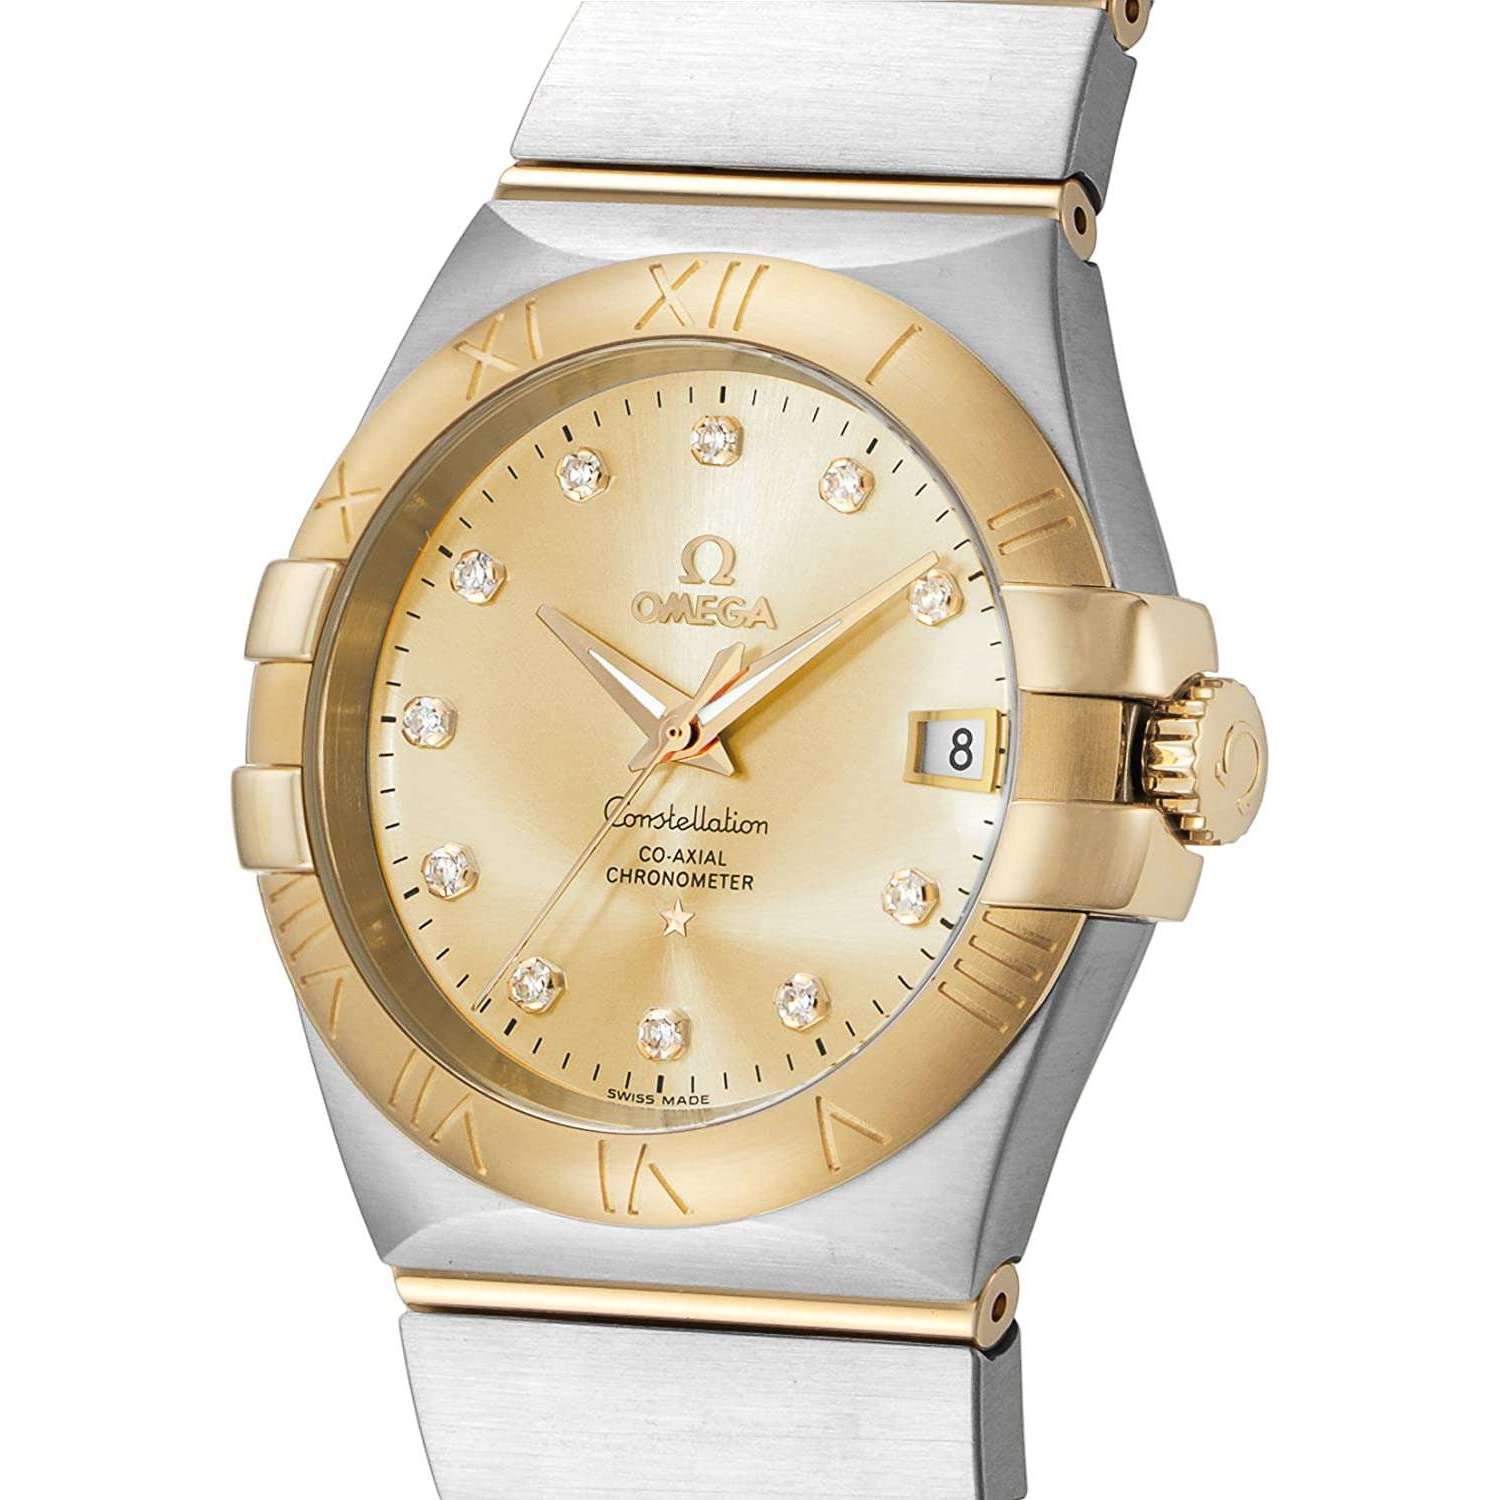 OMEGA CONSTELLATION CO-AXIAL CHRONOMETER 35 MM WOMEN WATCH 123.20.35.20.58.001 - ROOK JAPAN